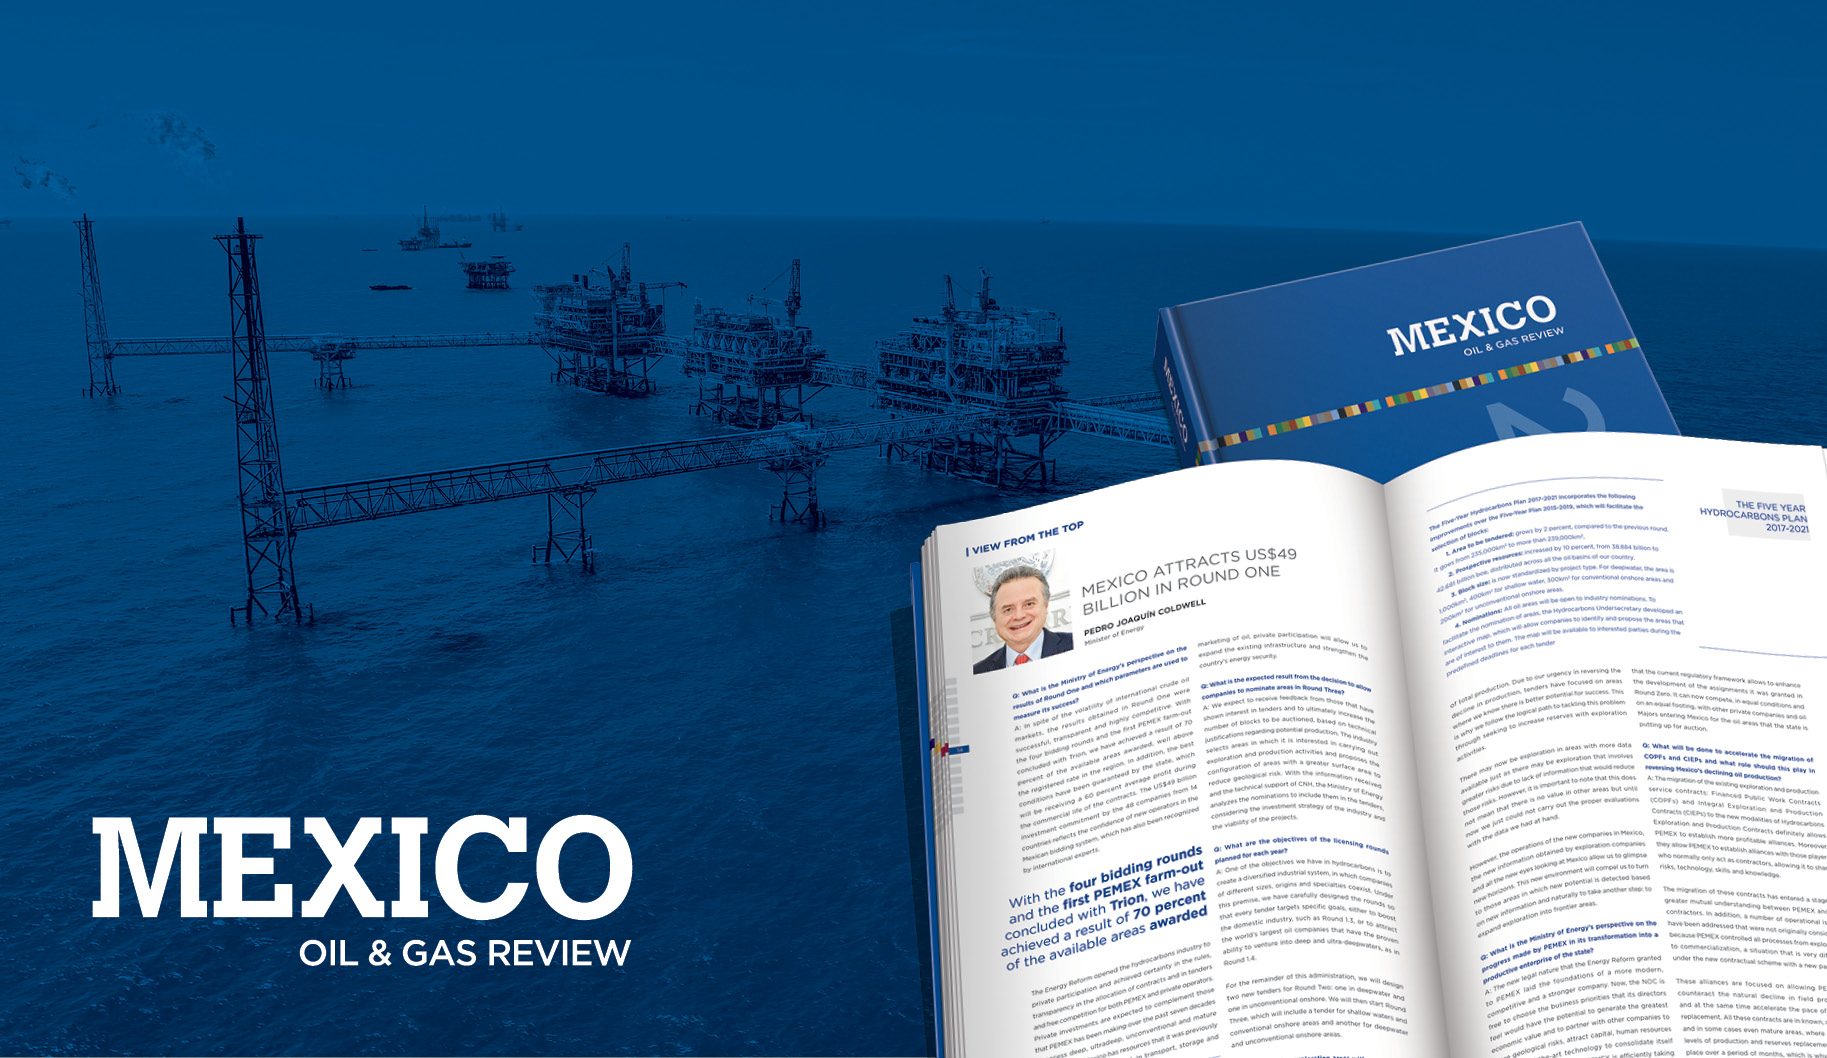 Mexico Oil & Gas Review 2019/20